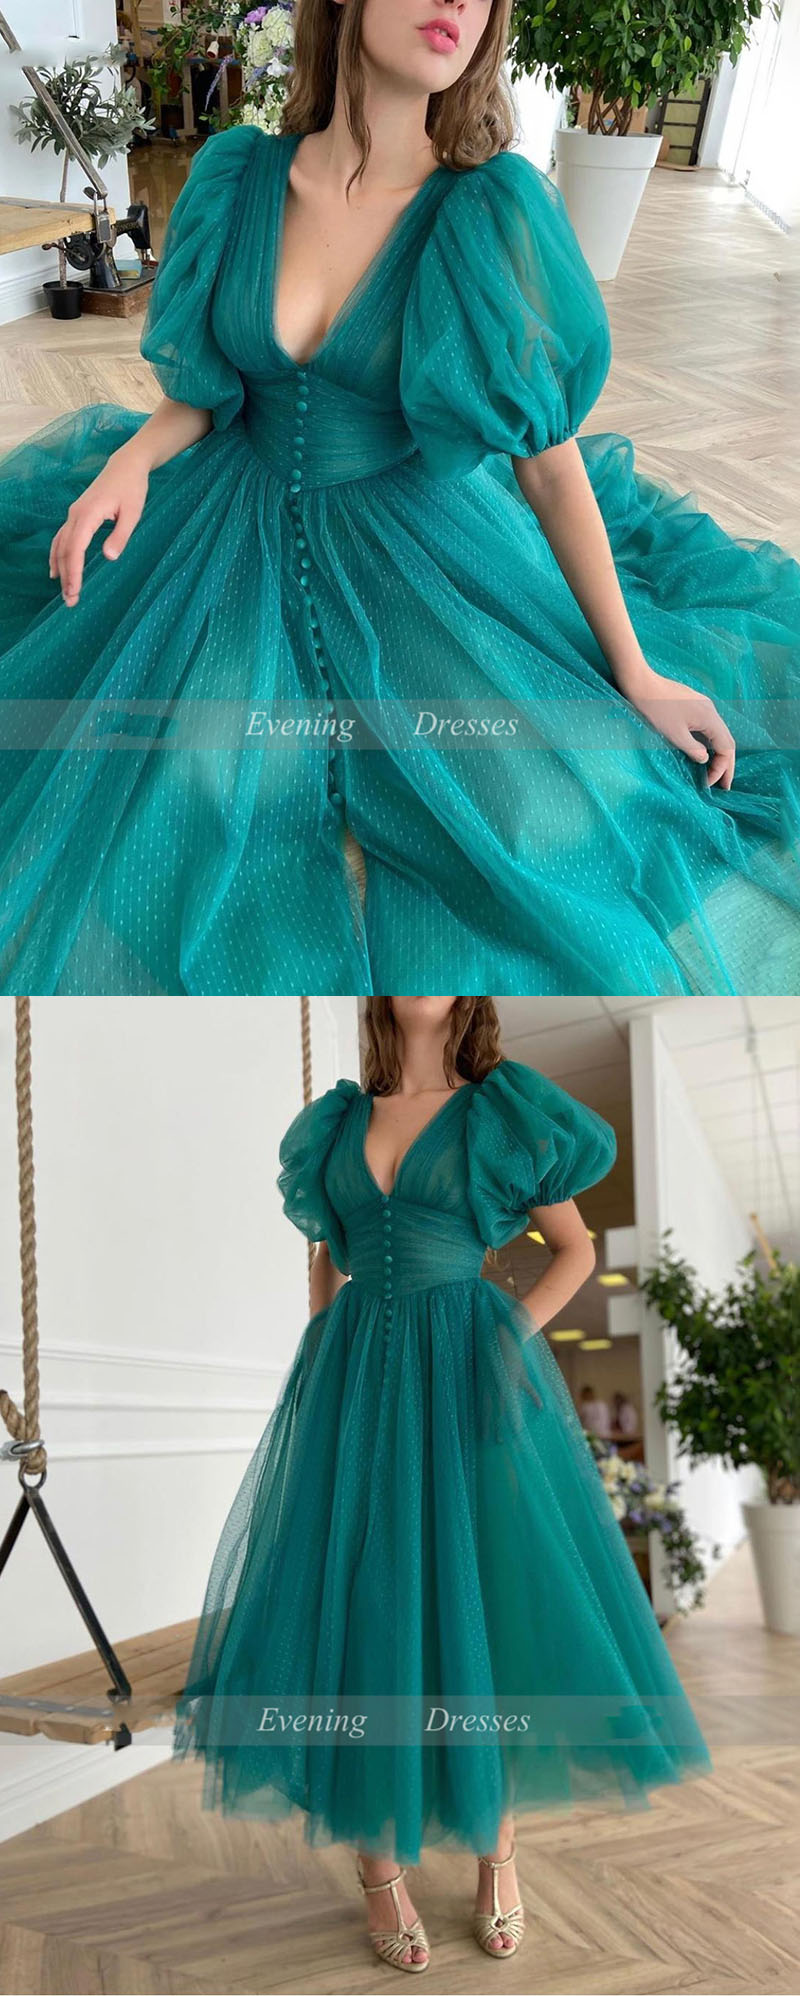 Vintage Teal Green Button Dot 1950s Gown Prom Party Dress Teal Length Puffy  Sleeves Swing Dress PL10130